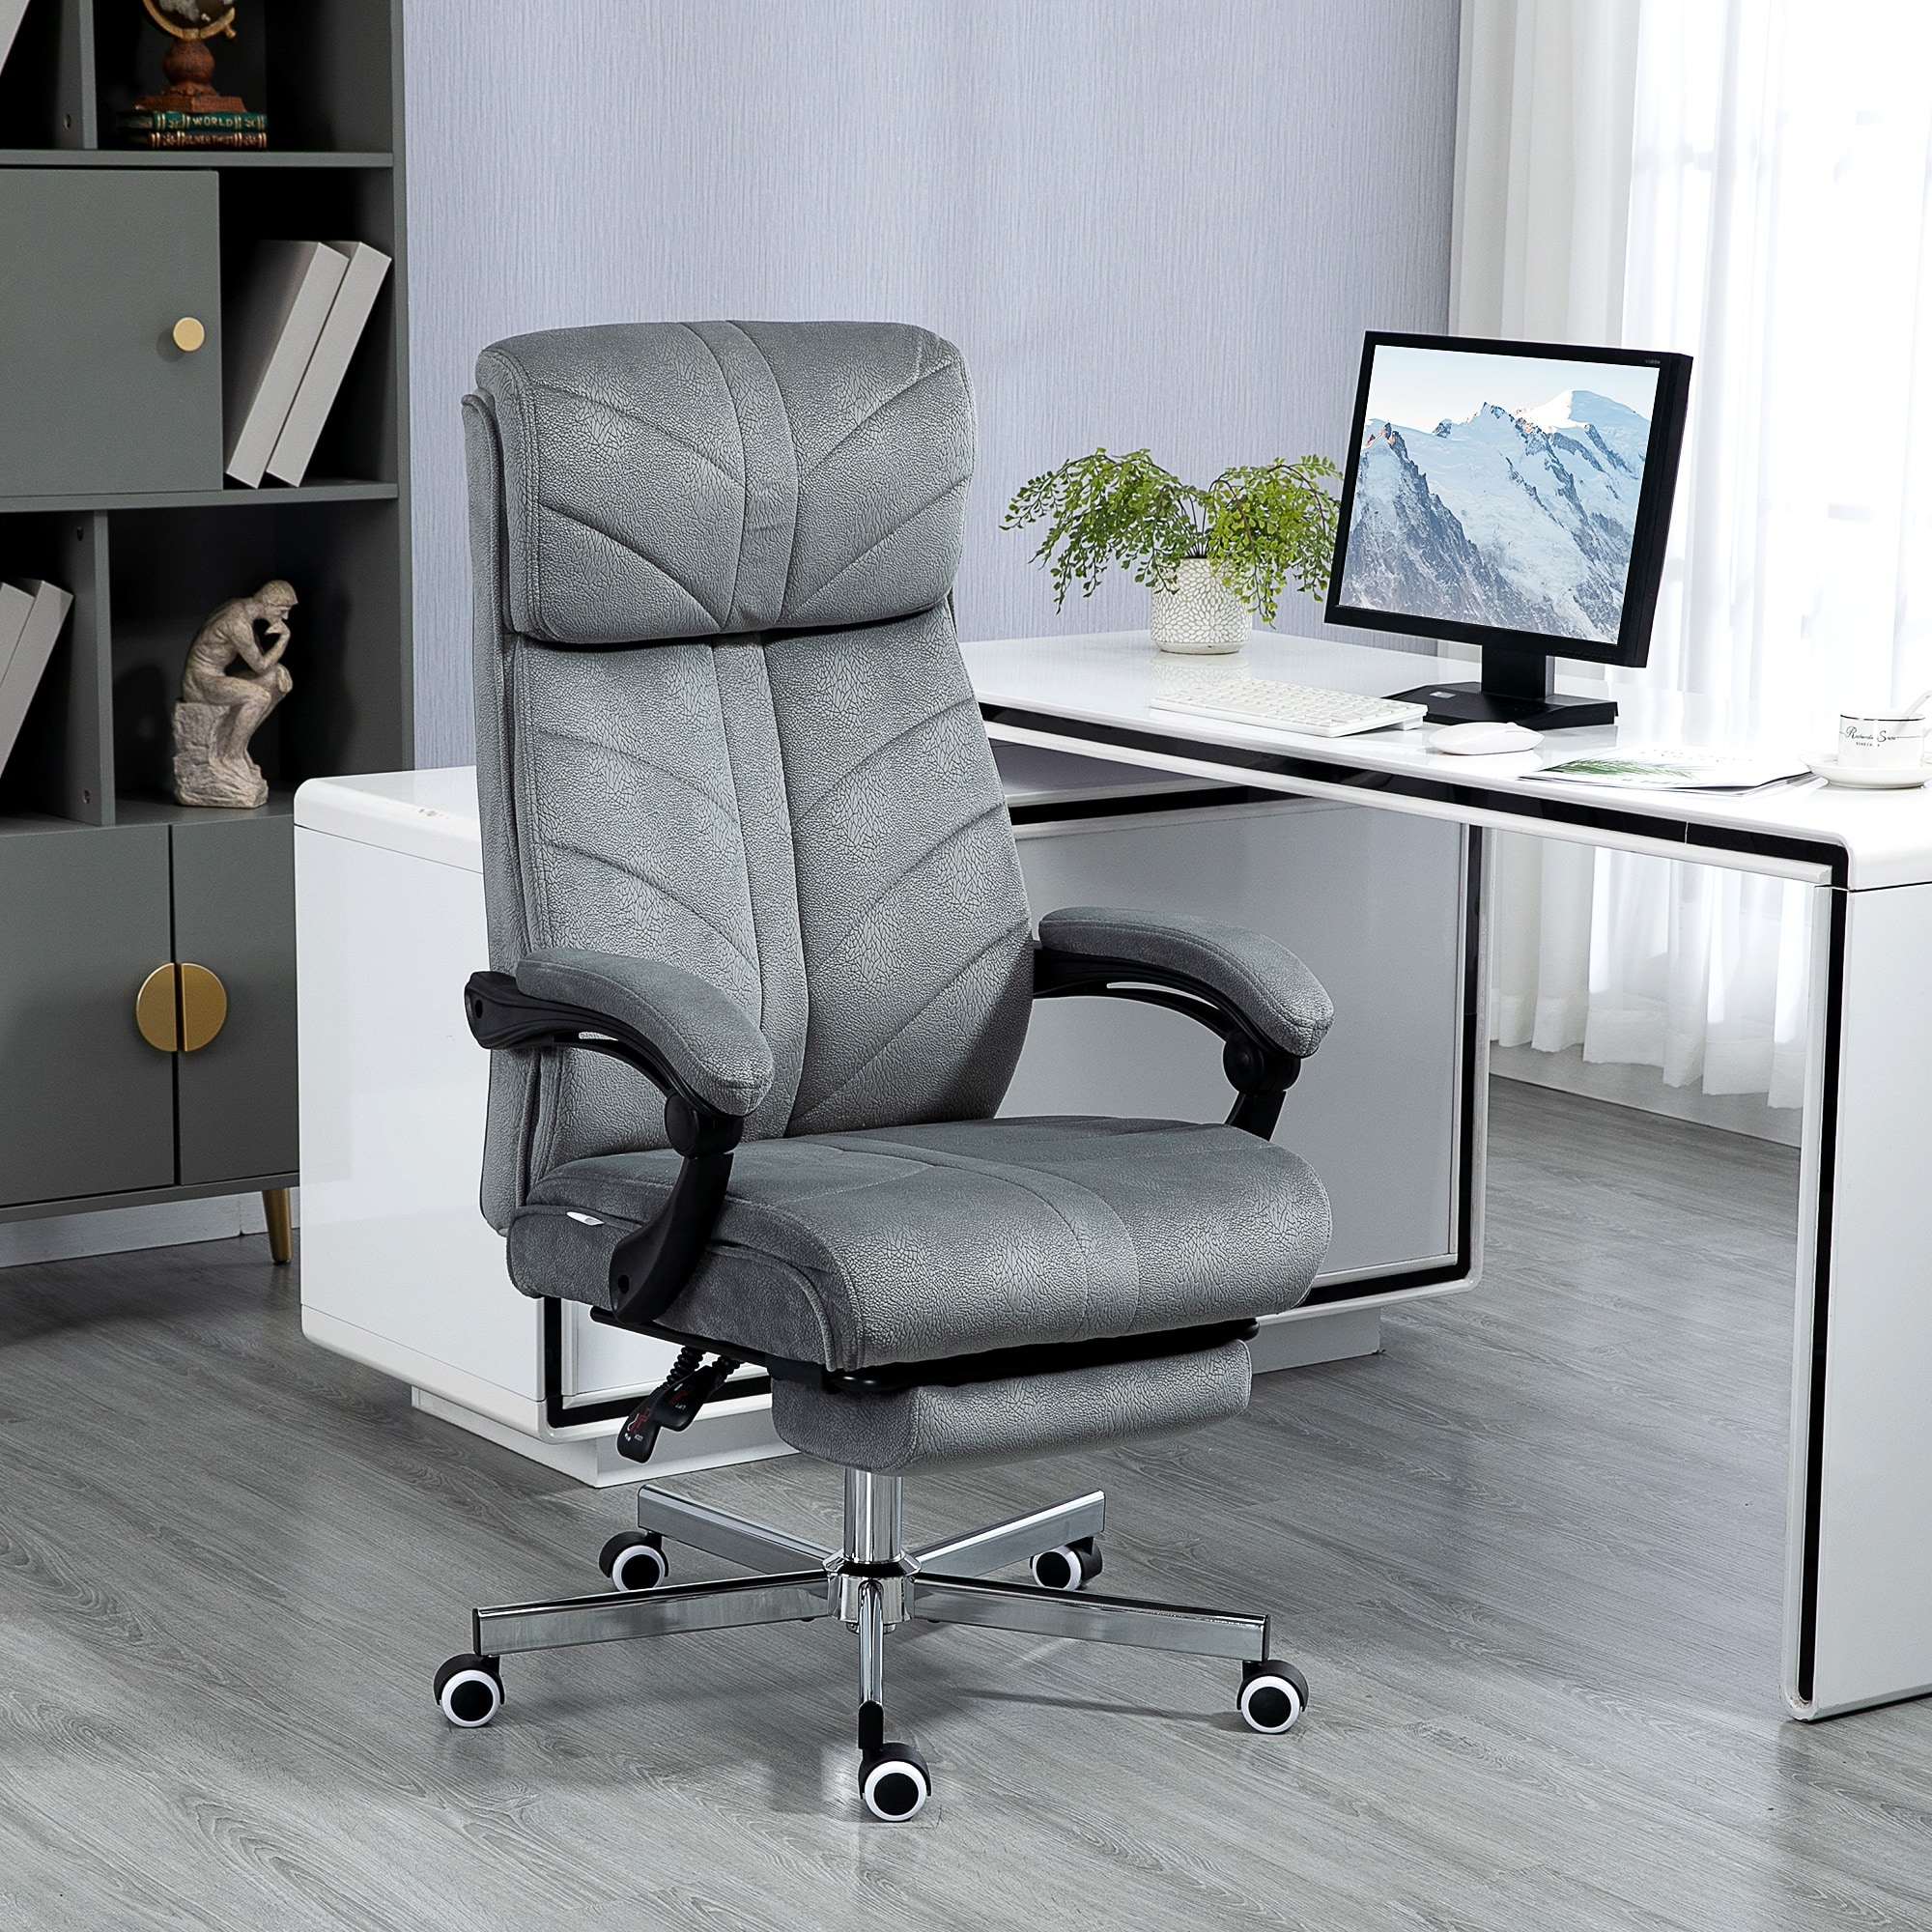 Vinsetto Ergonomic Office Chair Swivel High Back Computer Desk Chair with  Adjustable Height Flip Up Armrest Comfy Thick Padded Cushions Wheels Grey